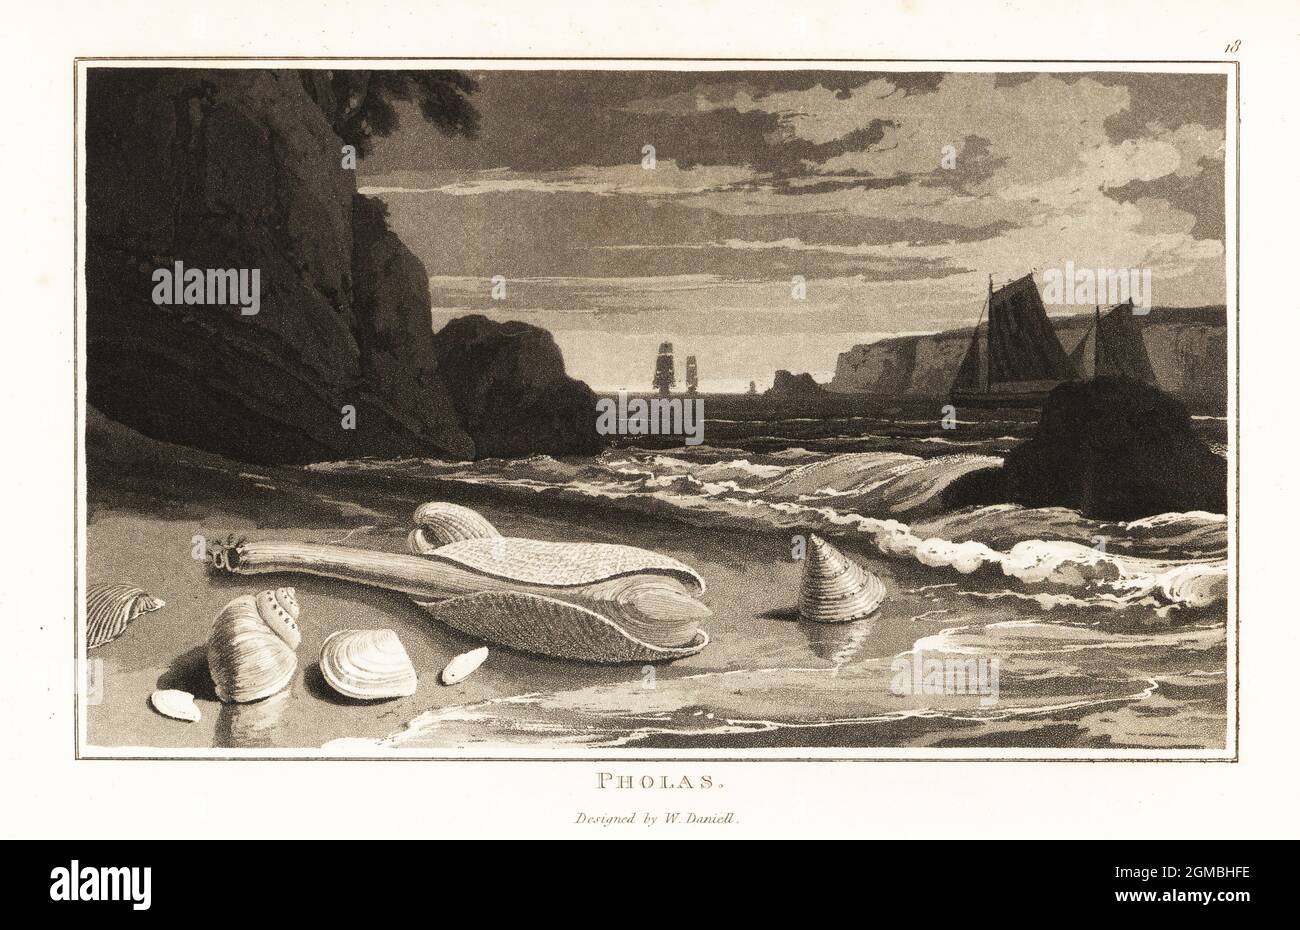 Common piddock or pholas shells, Pholas dactylus, on a beach. Tall ships and sail boats in the channel behind. Aquatint drawn and engraved by William Daniell from William Wood’s Zoography, Cadell and Davies, 1807. Stock Photo